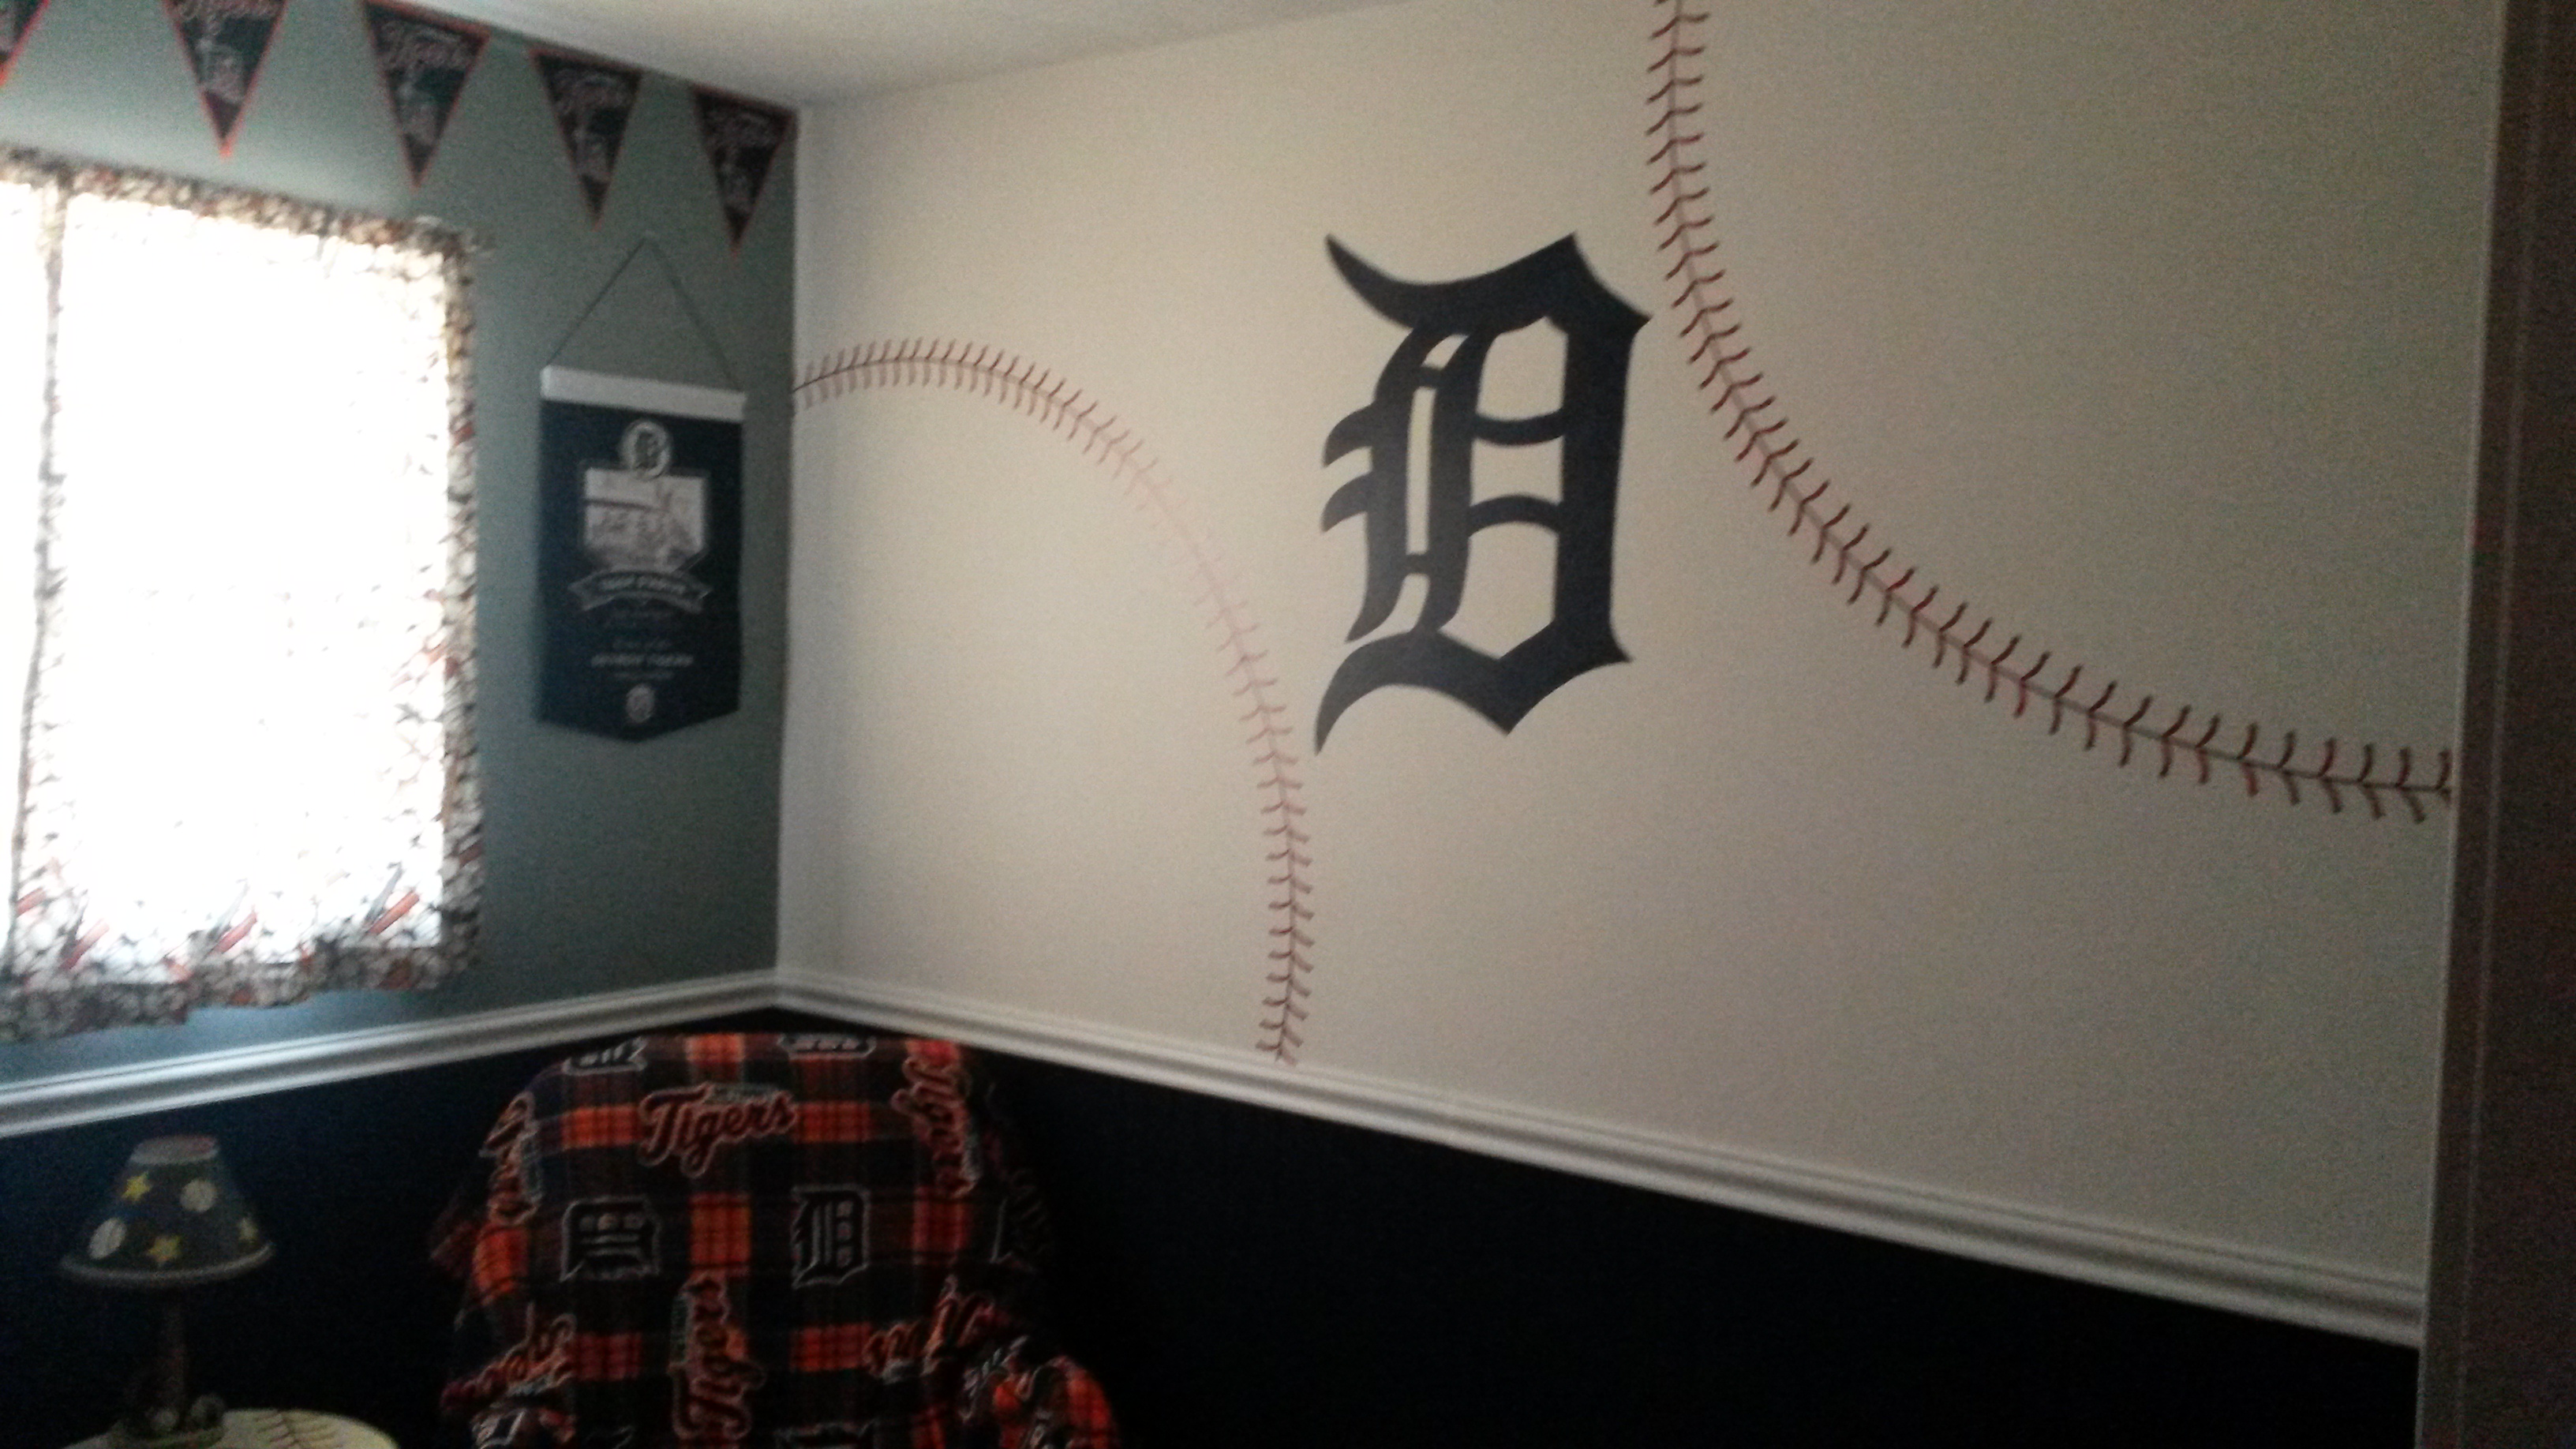 Baseball Accent Wall with Stitching Decals